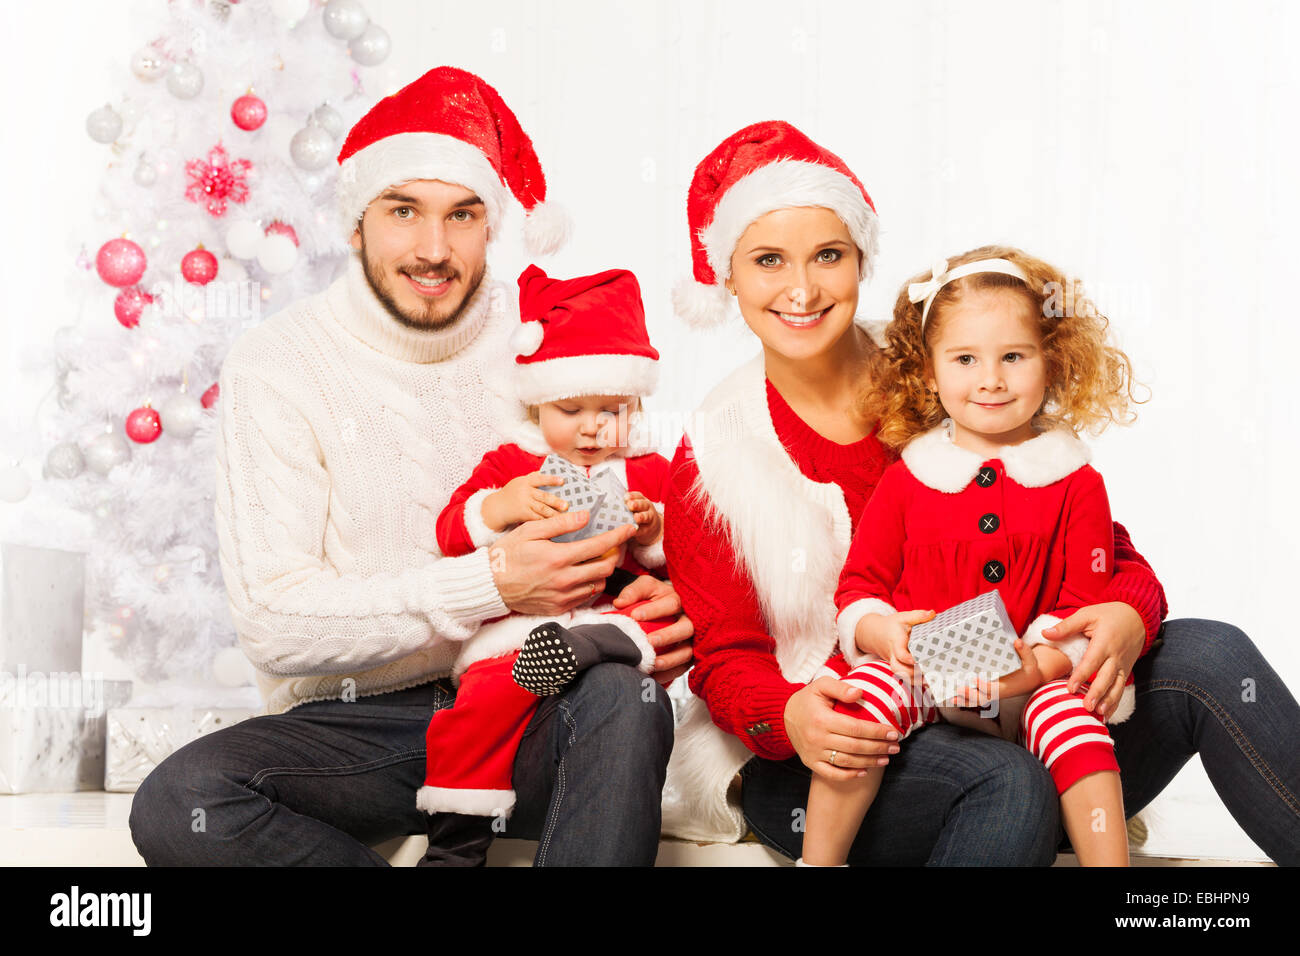 Happy young family with two children on Christmas Stock Photo